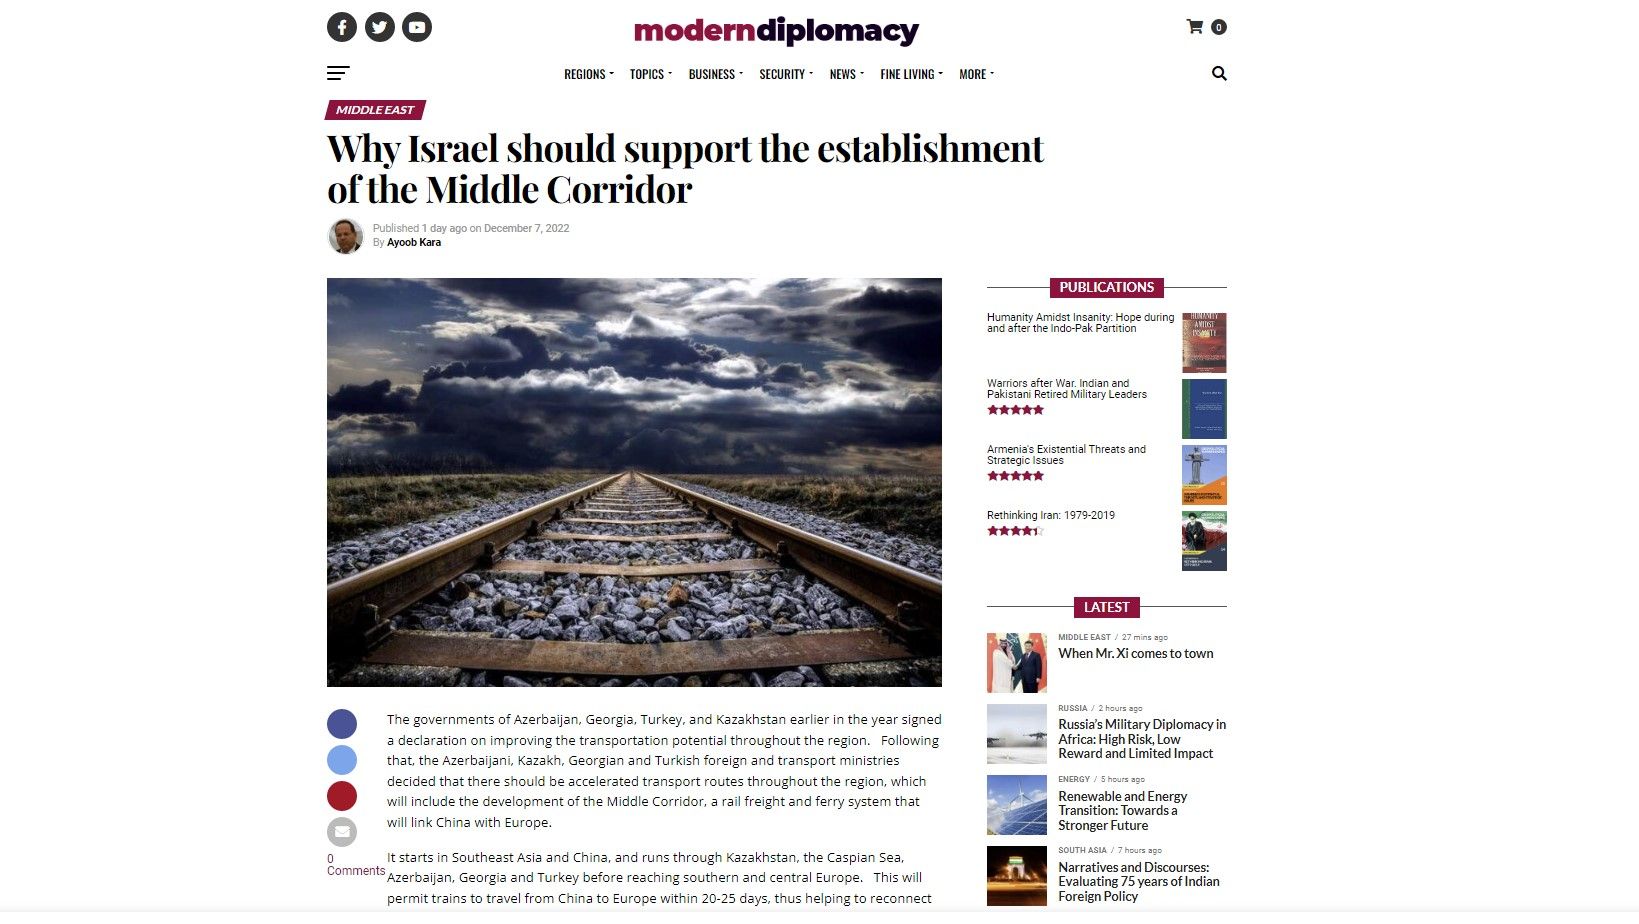 Europe's influential media platform wrote about "Middle Corridor"